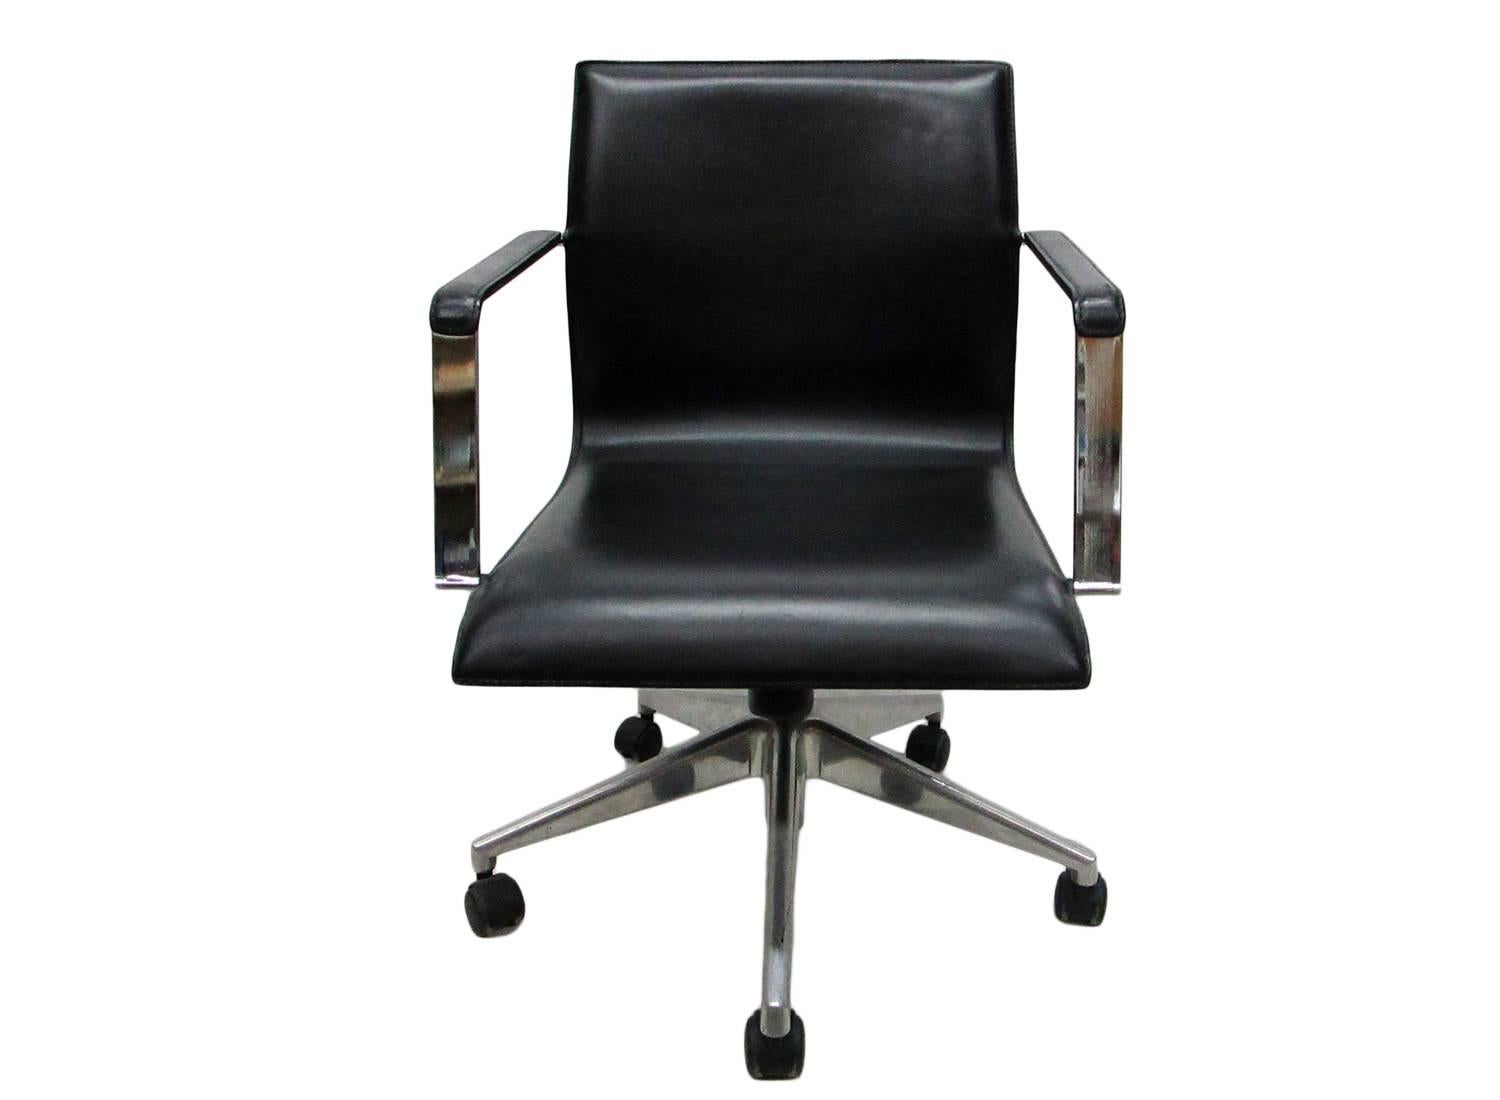 Five wheels French desk chair from the 1960s made in pressed leather and chrome.